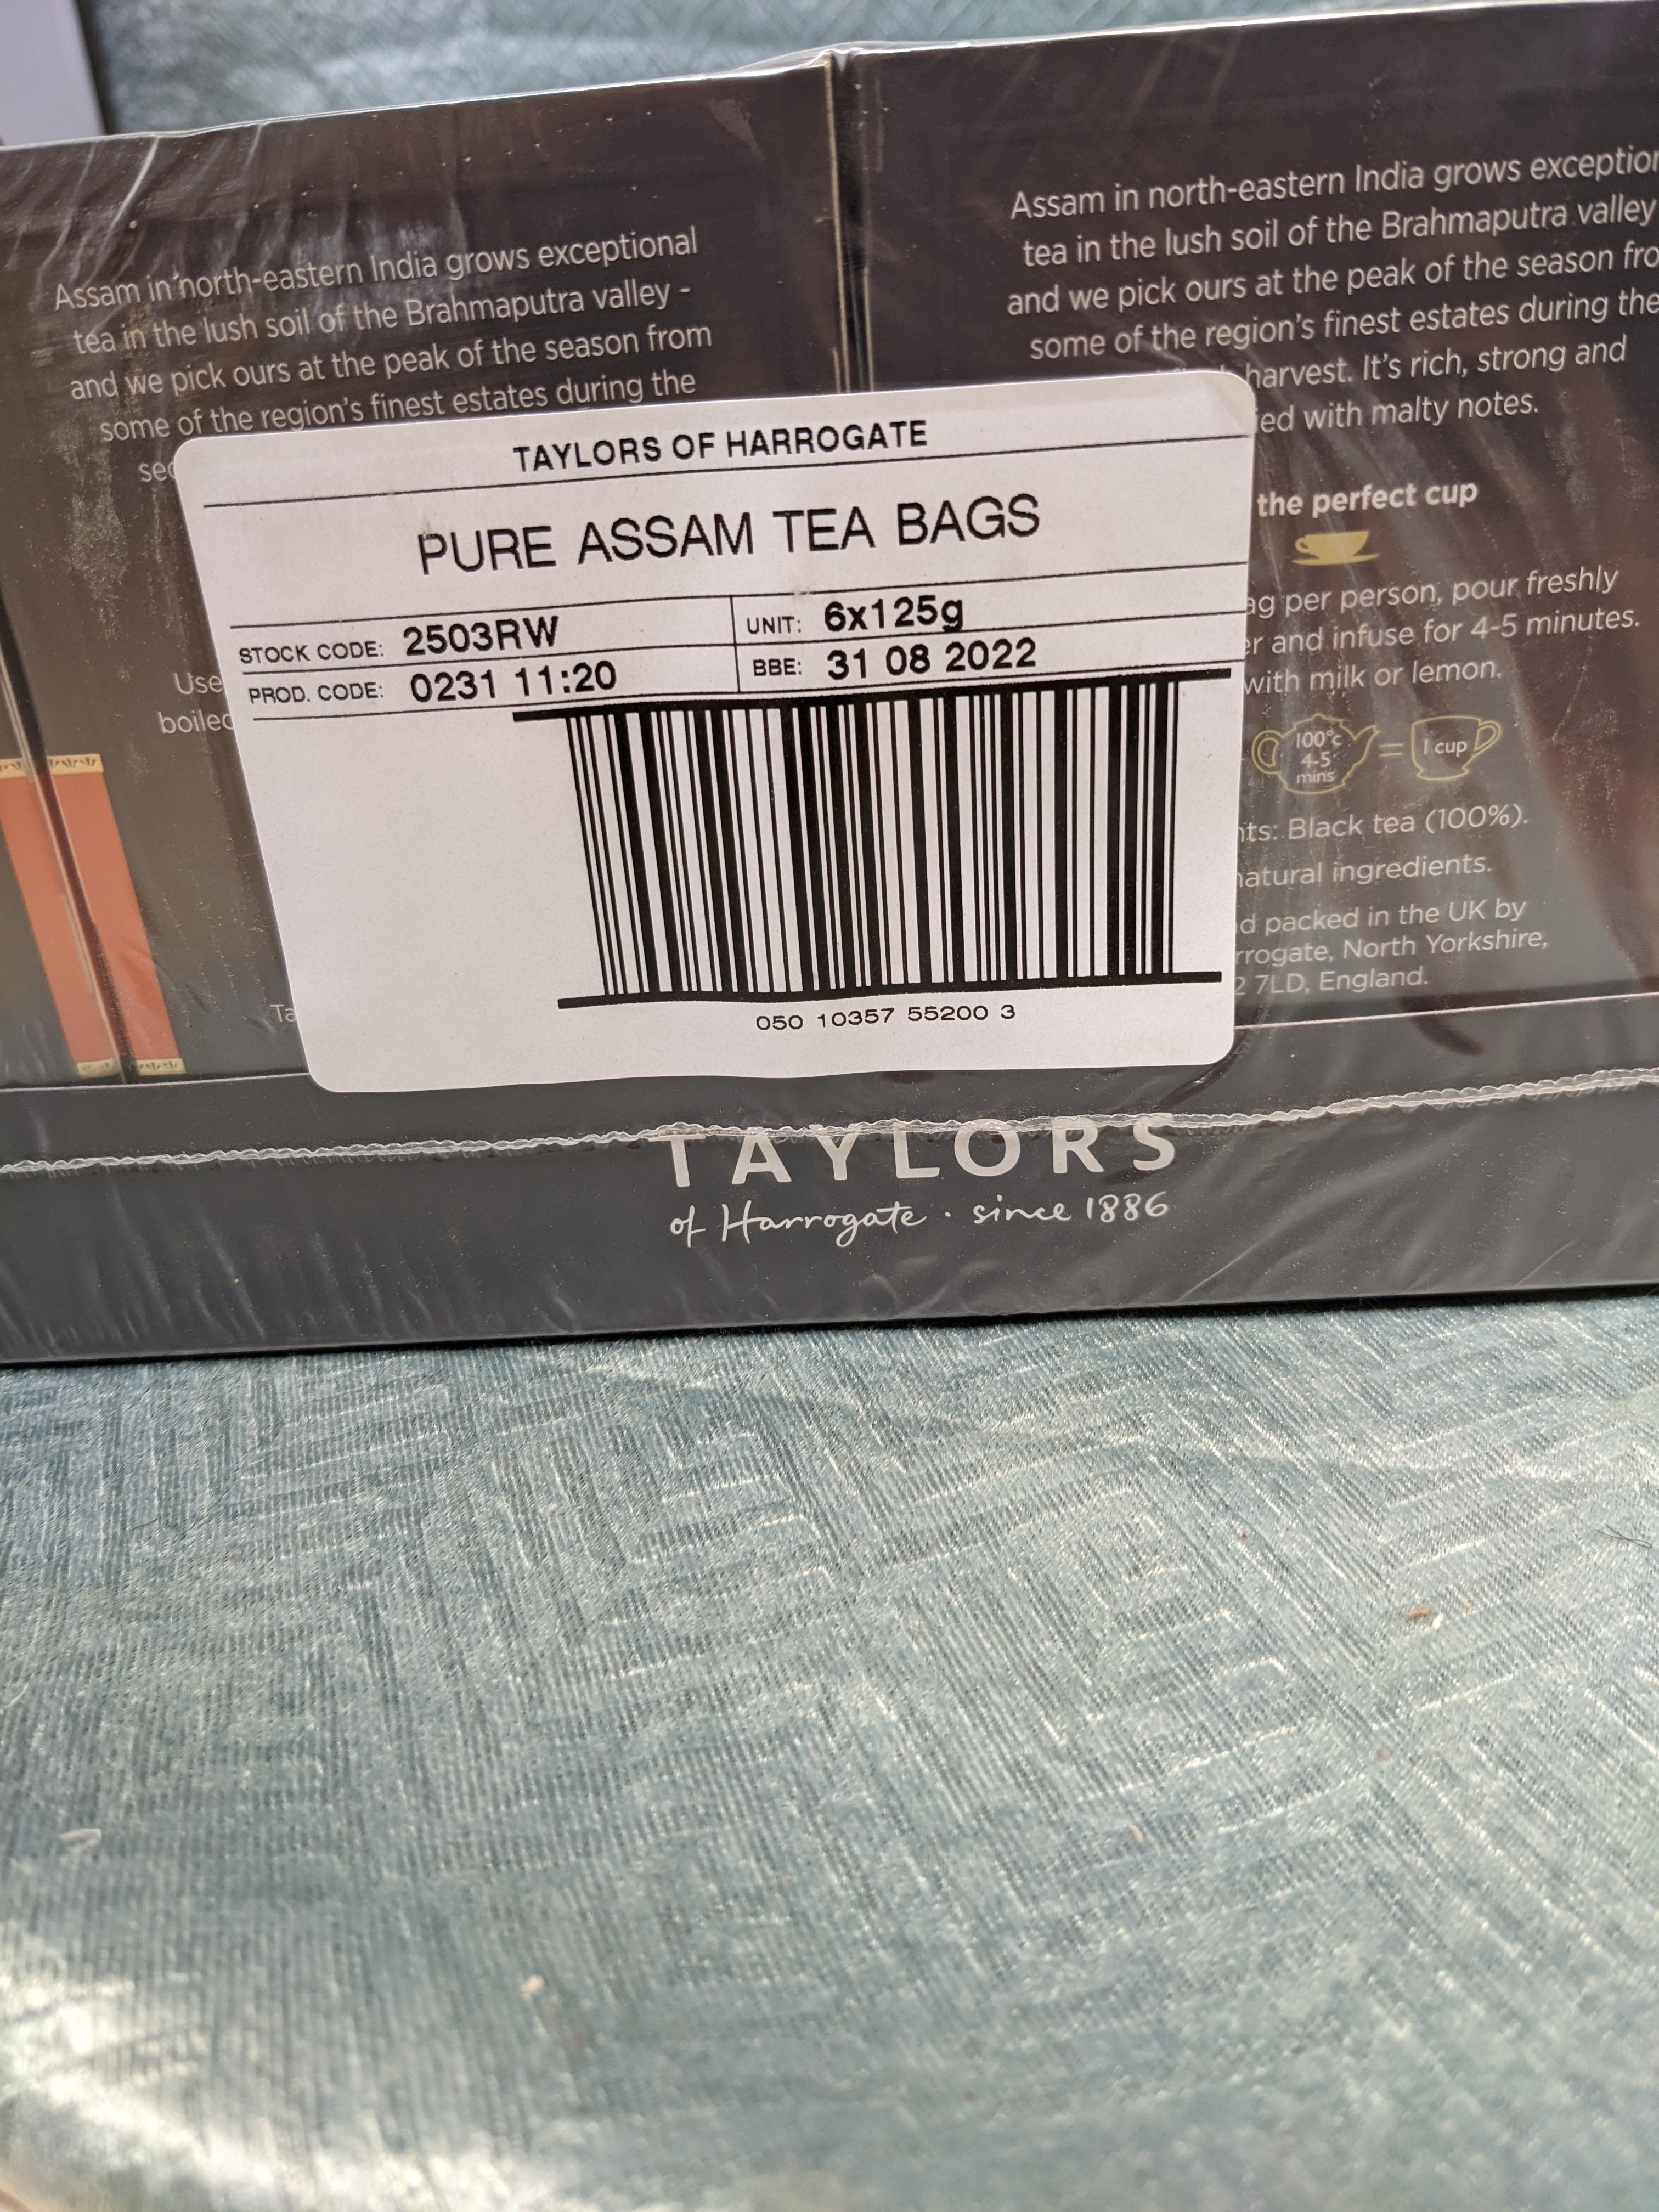 Taylors of Harrogate Pure Assam, 50 Teabags, (Pack of 6) - Expires 08/31/2022 (7583532384494)